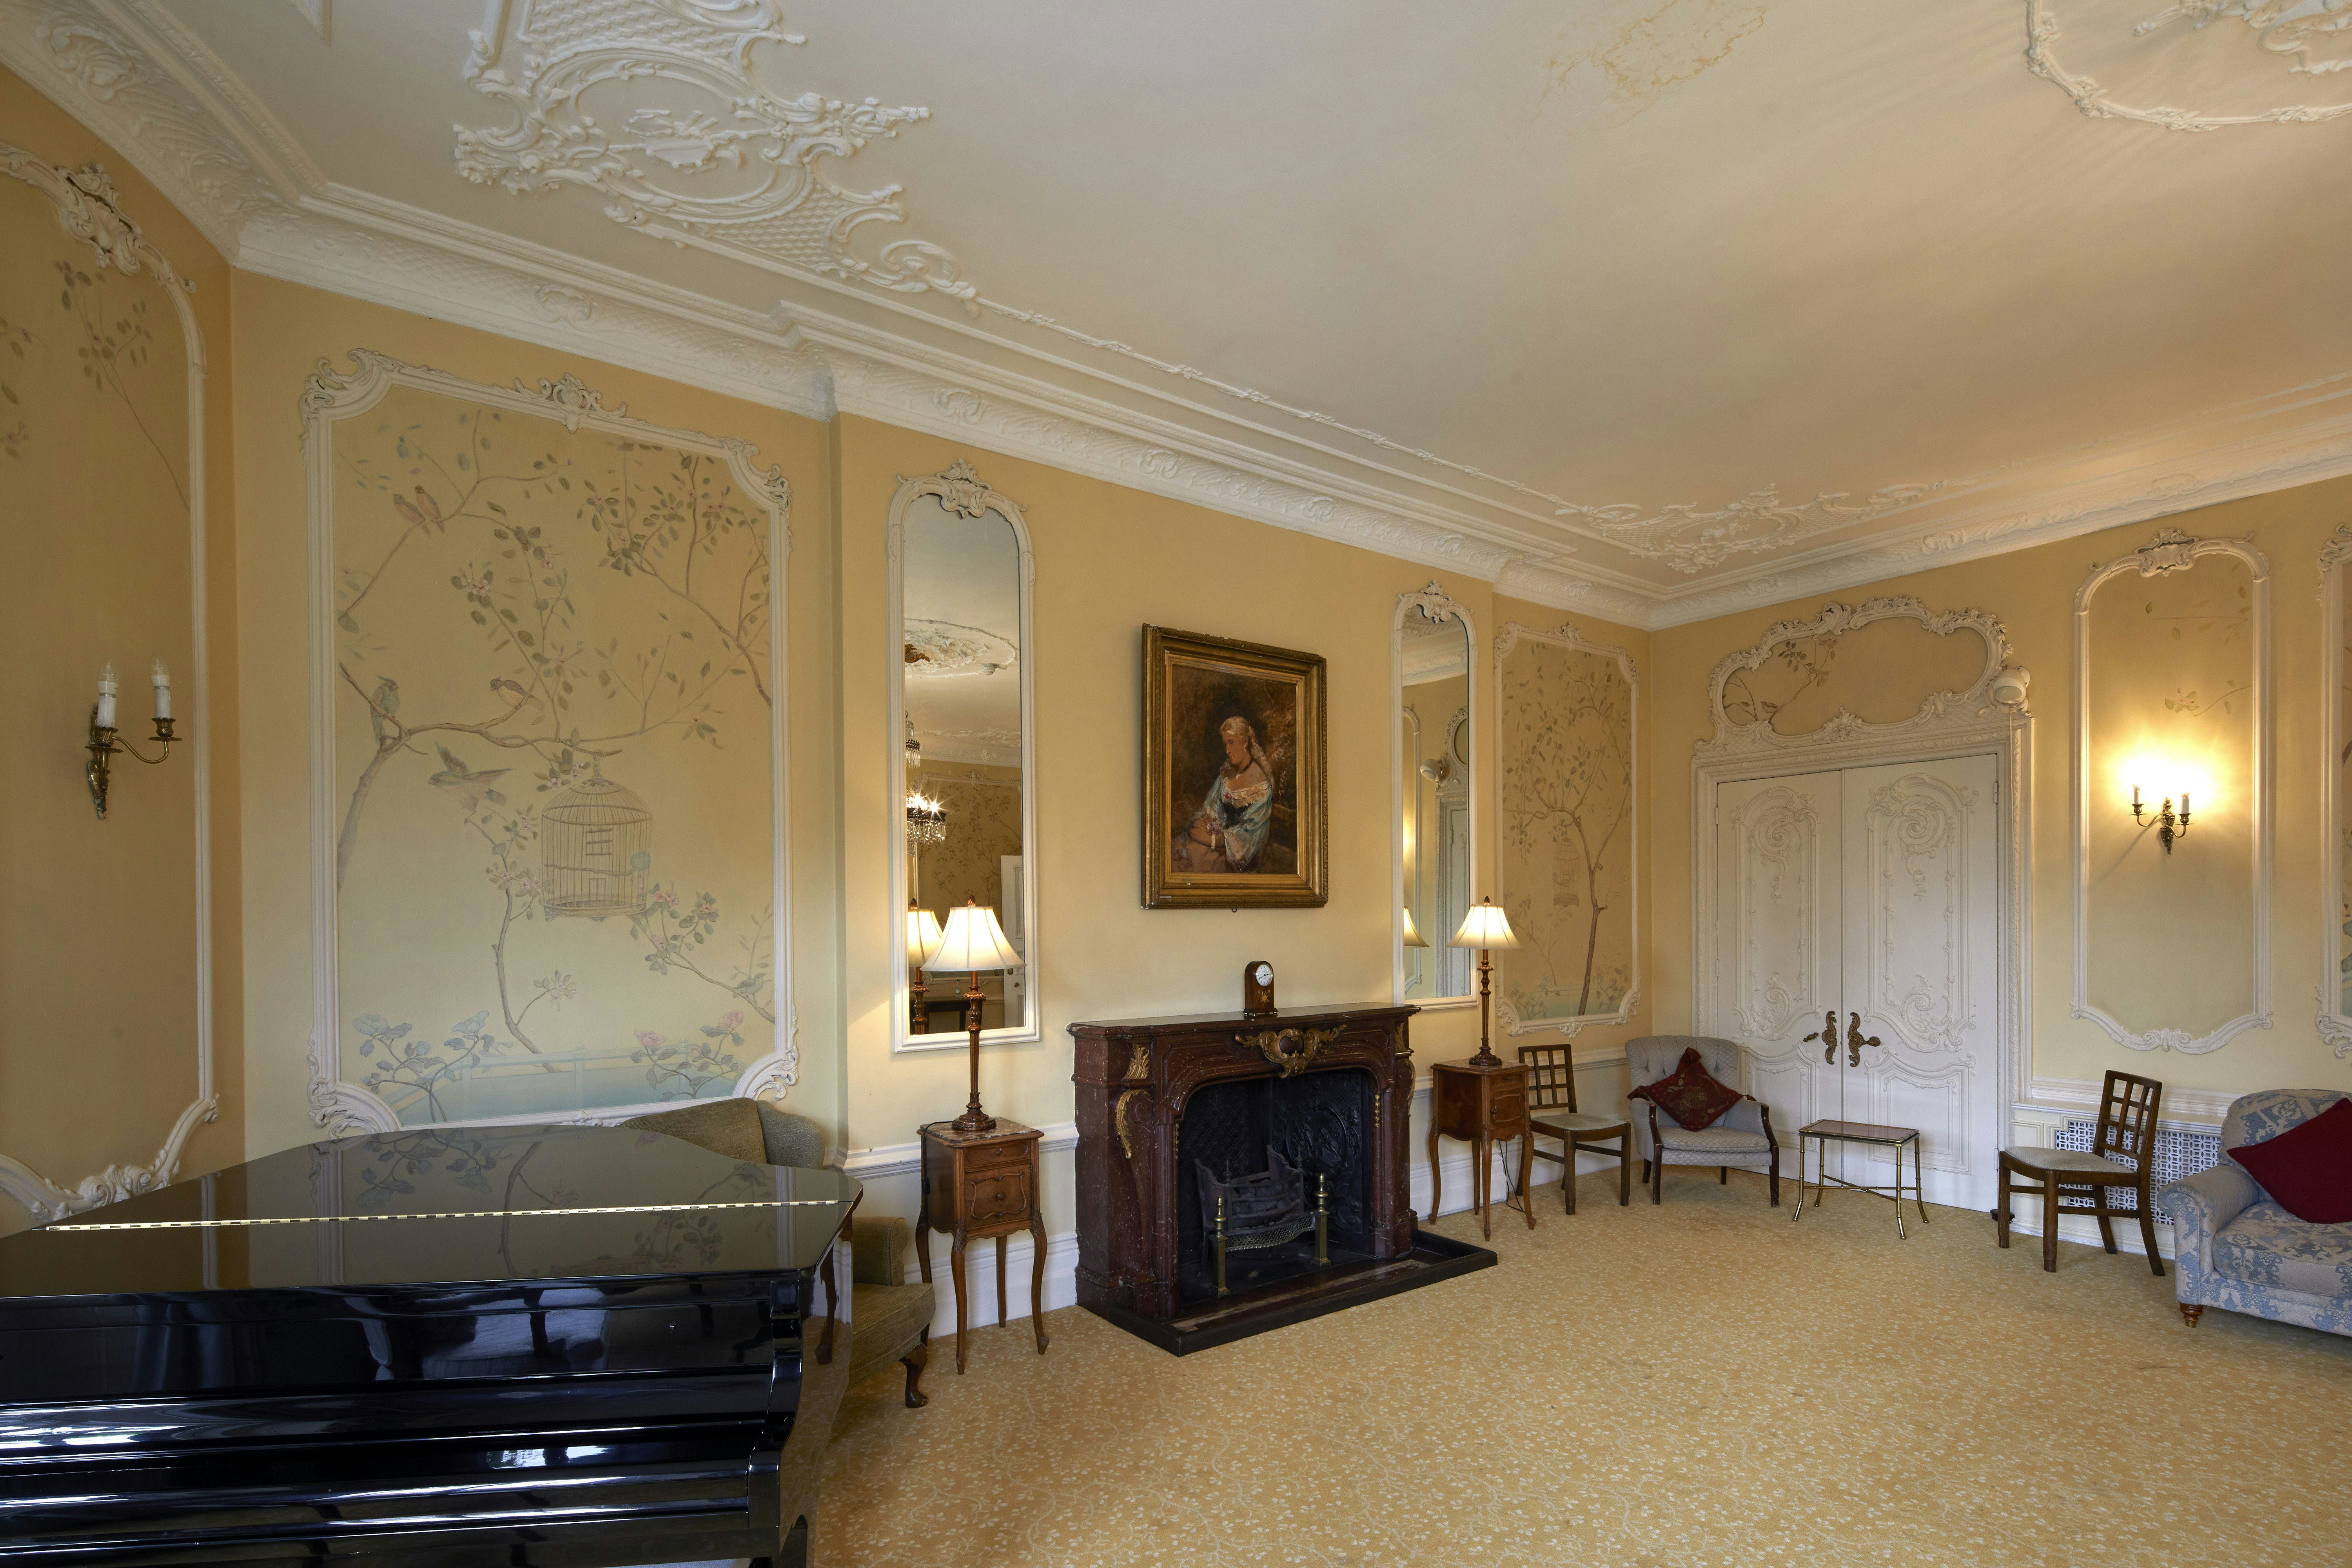 University Women's Club - The Drawing Room image 4